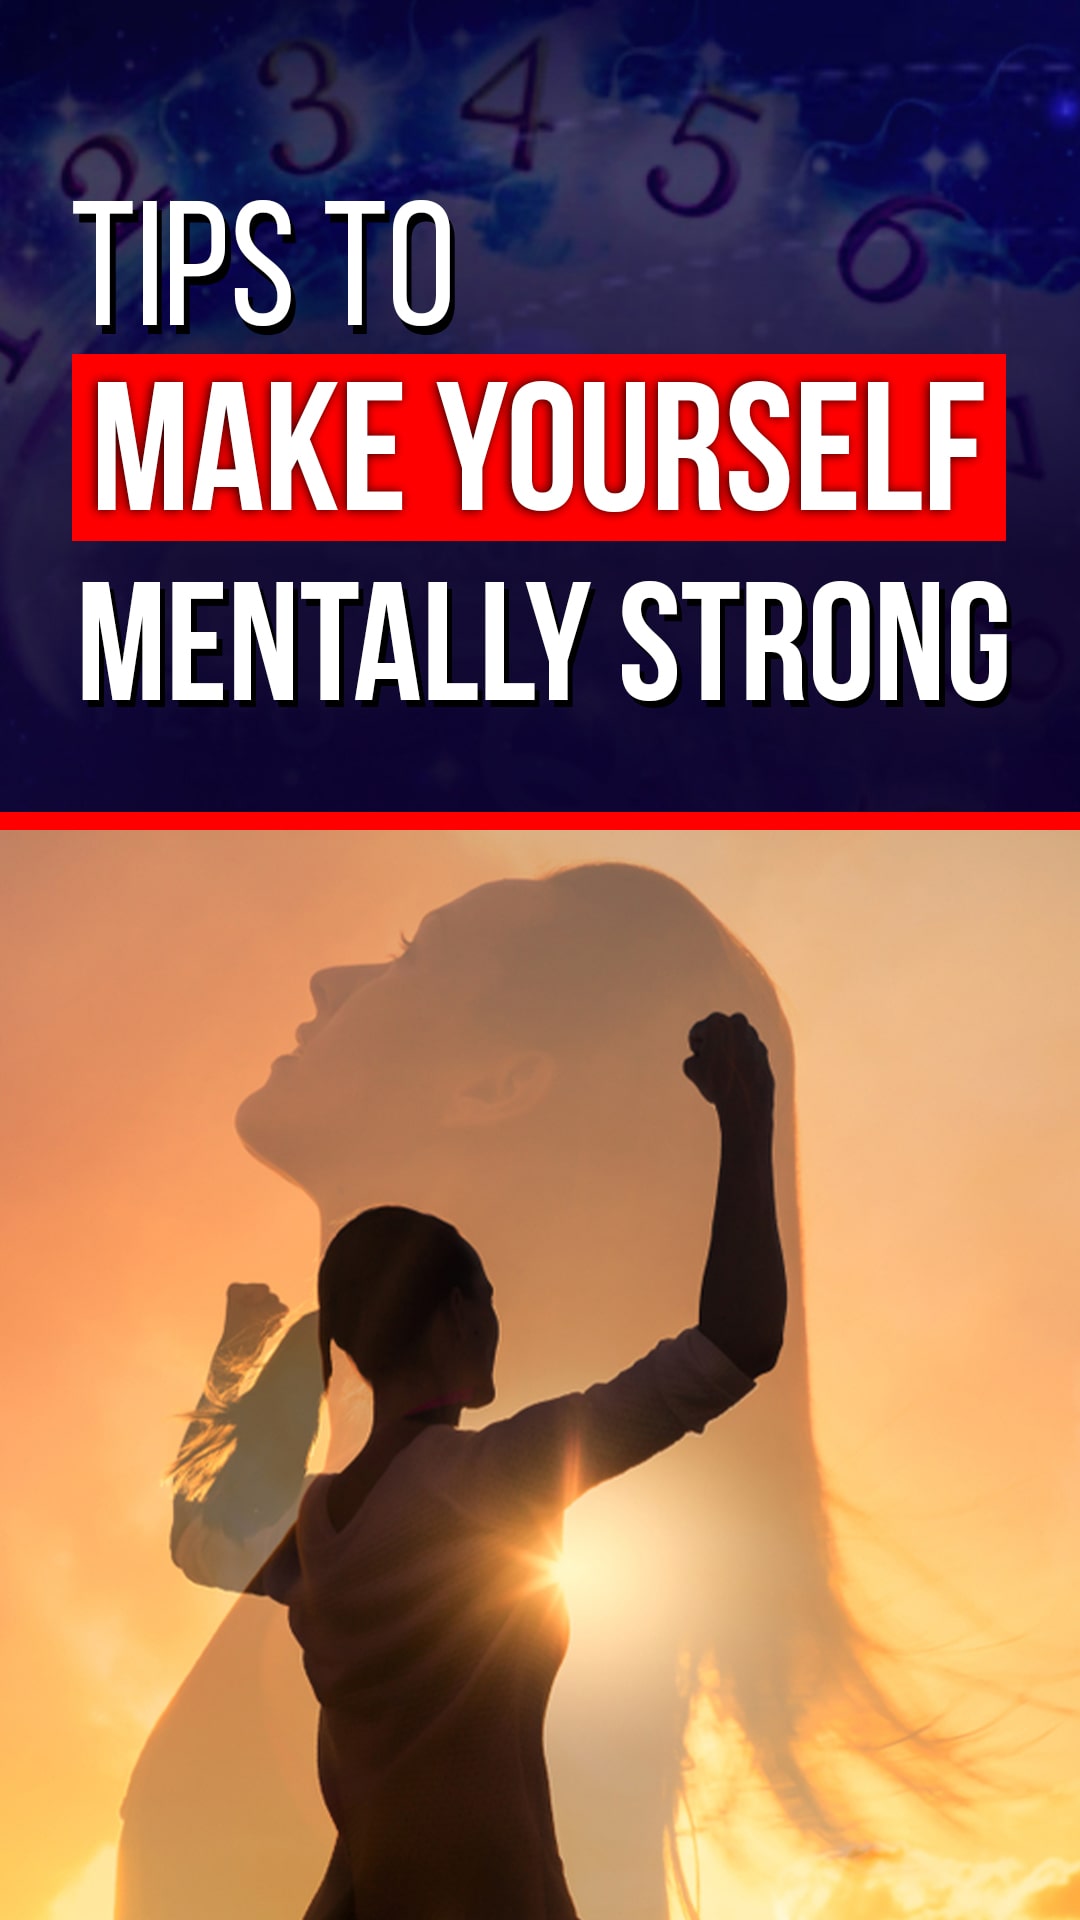 Tips to make yourself mentally strong in 2022